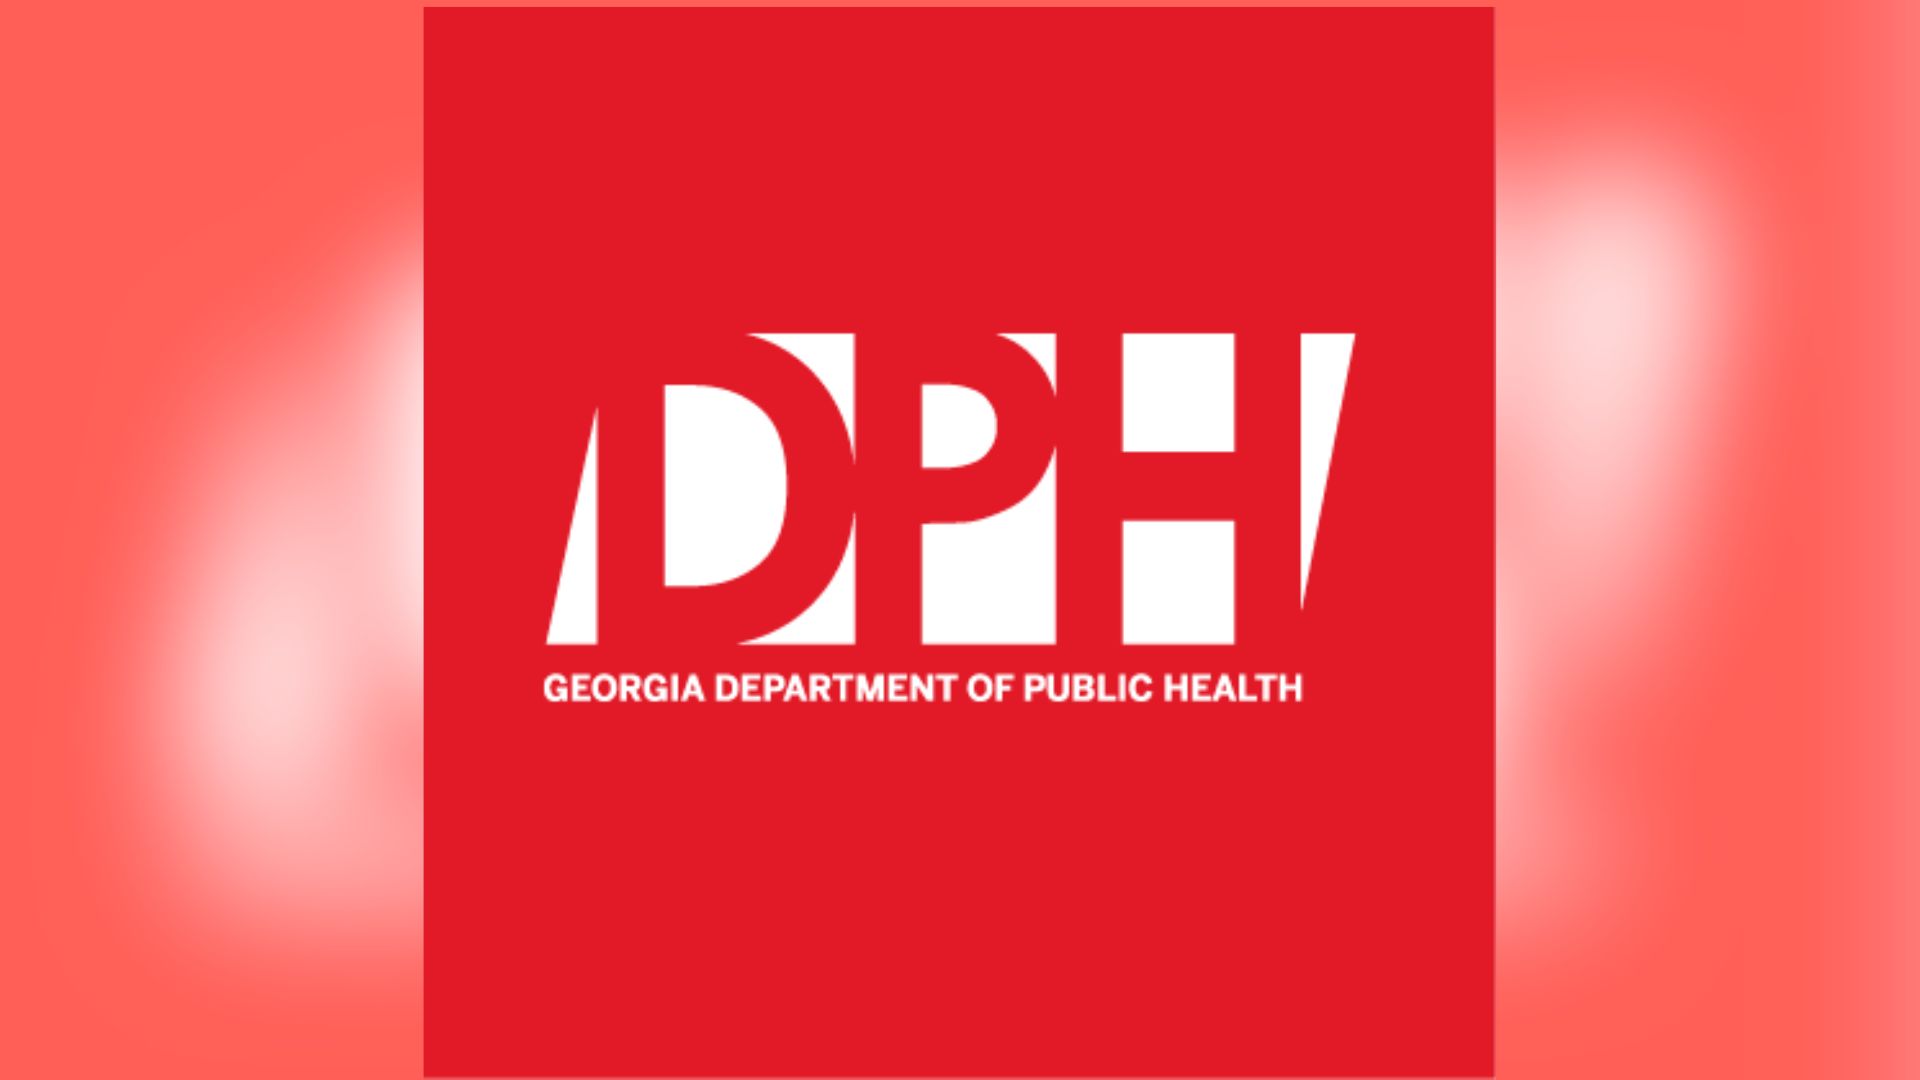 Several Salmonella attacks in Georgia forces the Georgia Department of Public Health to issue a public health warning